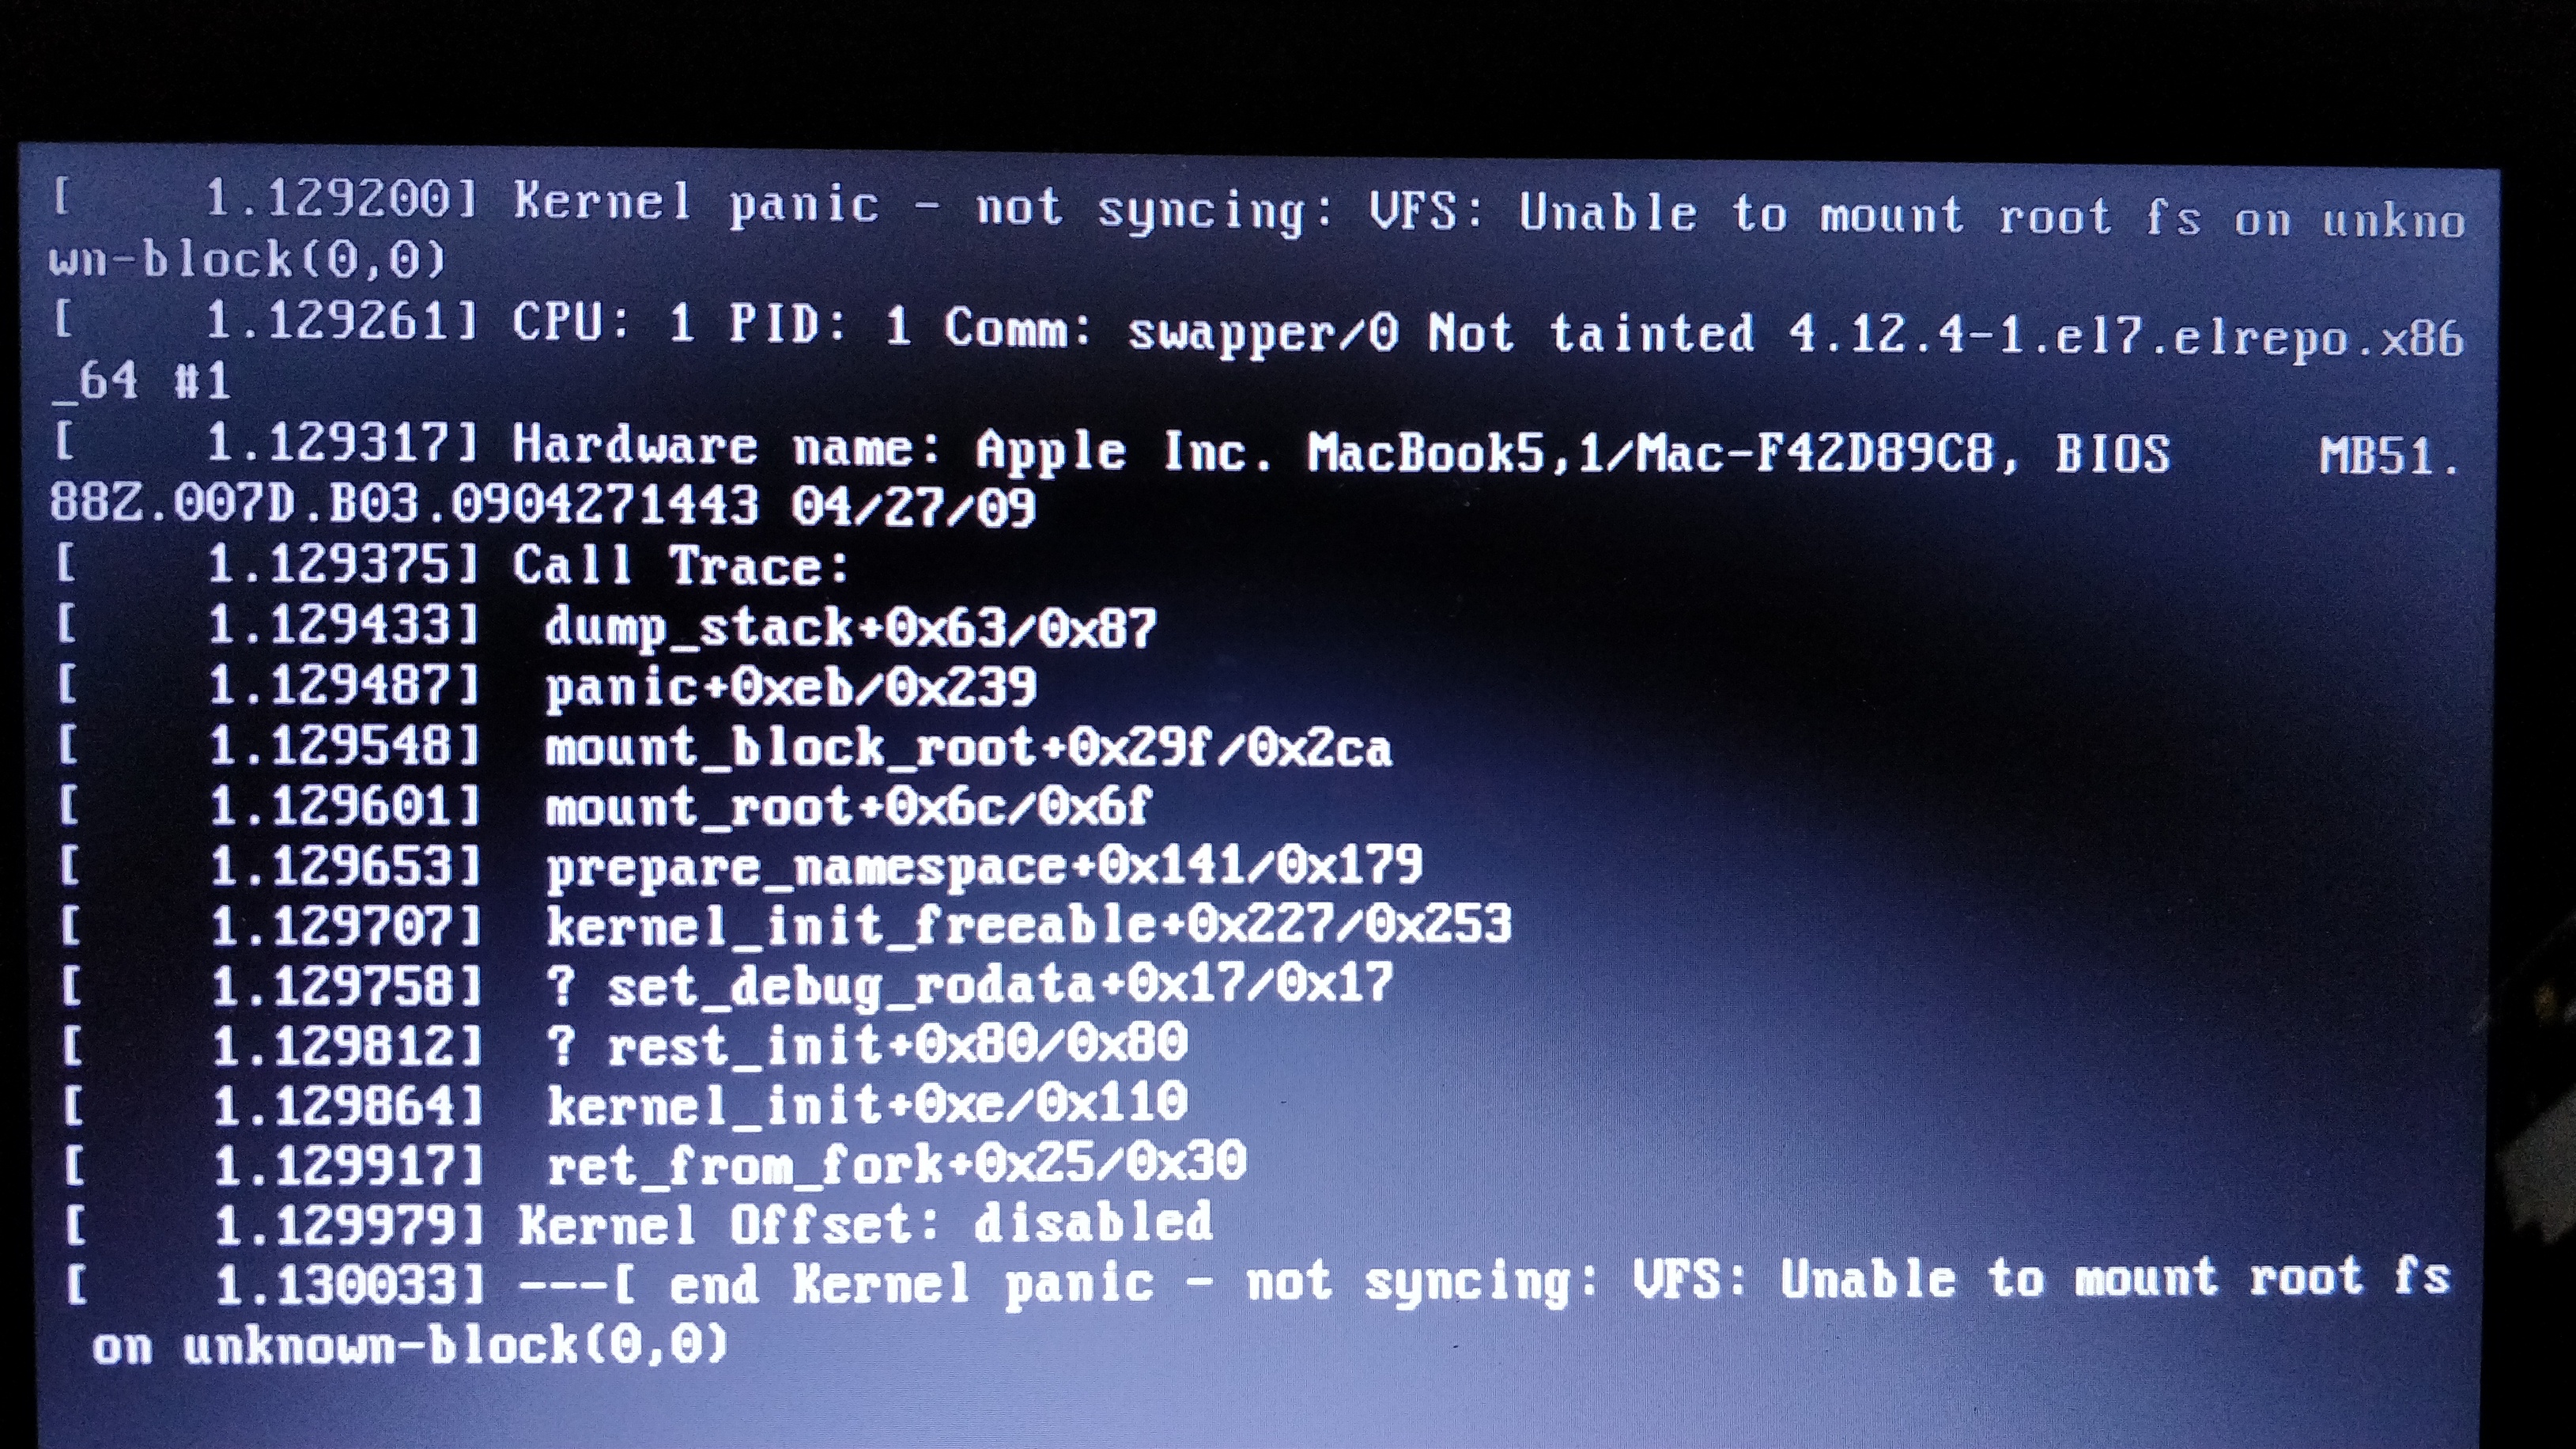 Kernel panic after update today.